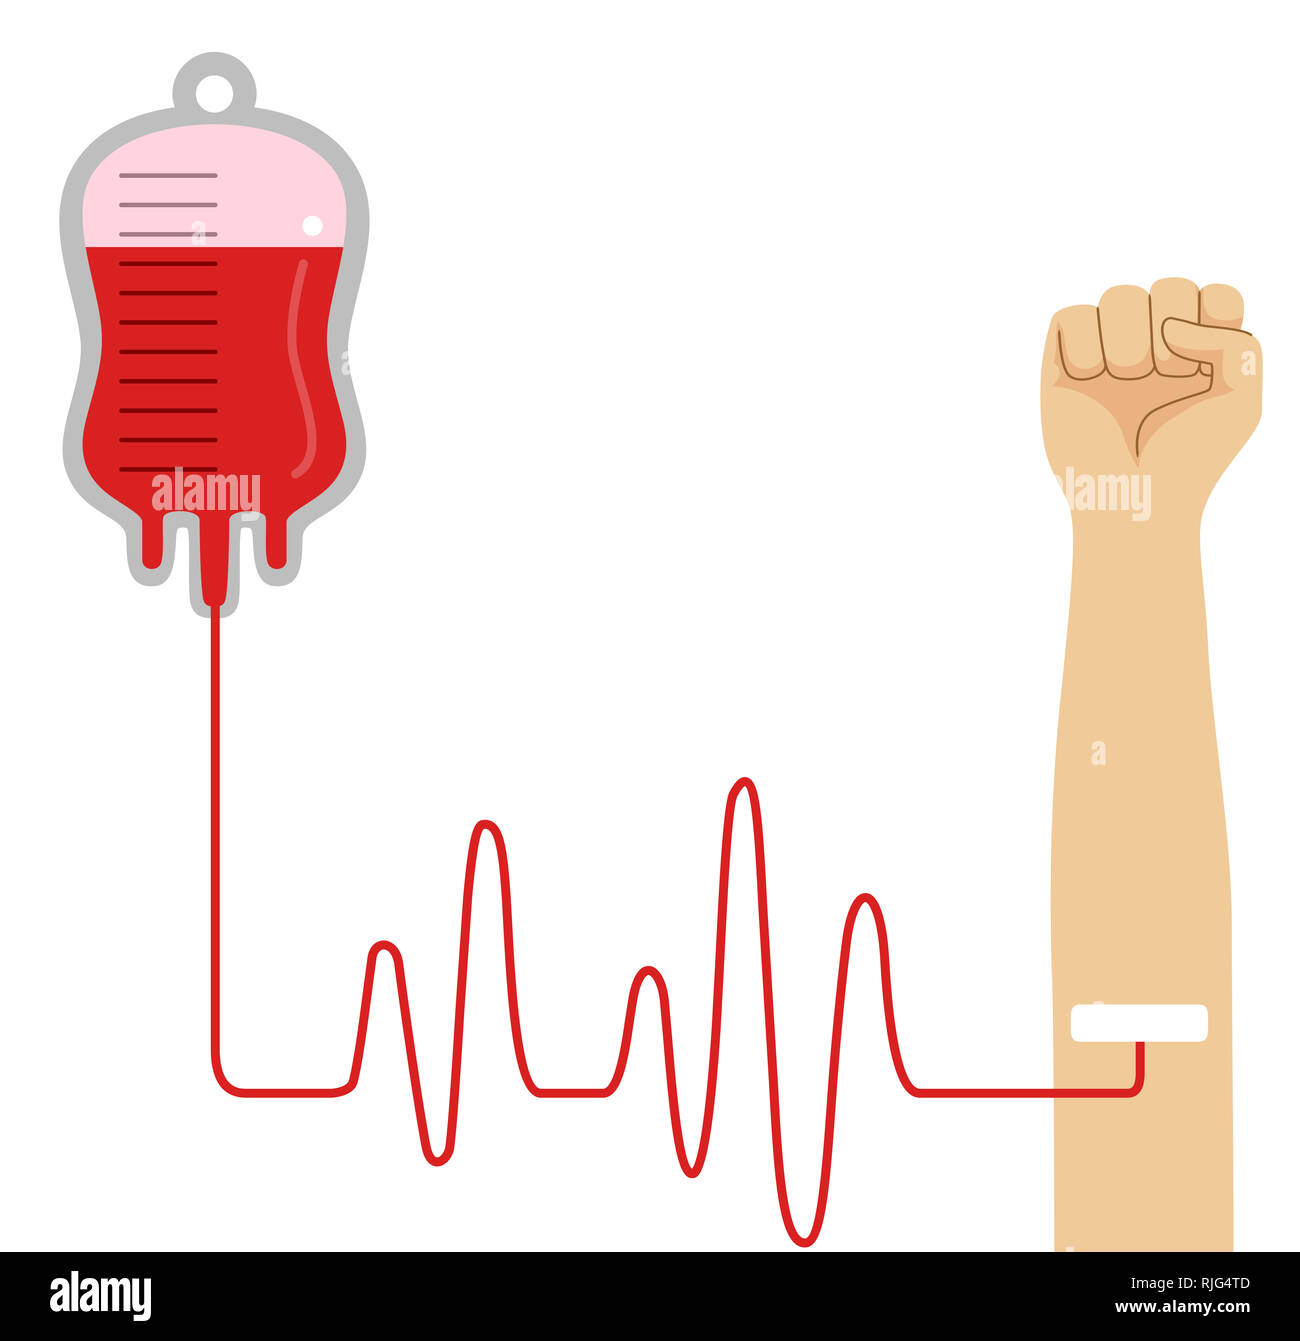 Illustration of a Hand with Blood Bag Connected for Donation Stock Photo